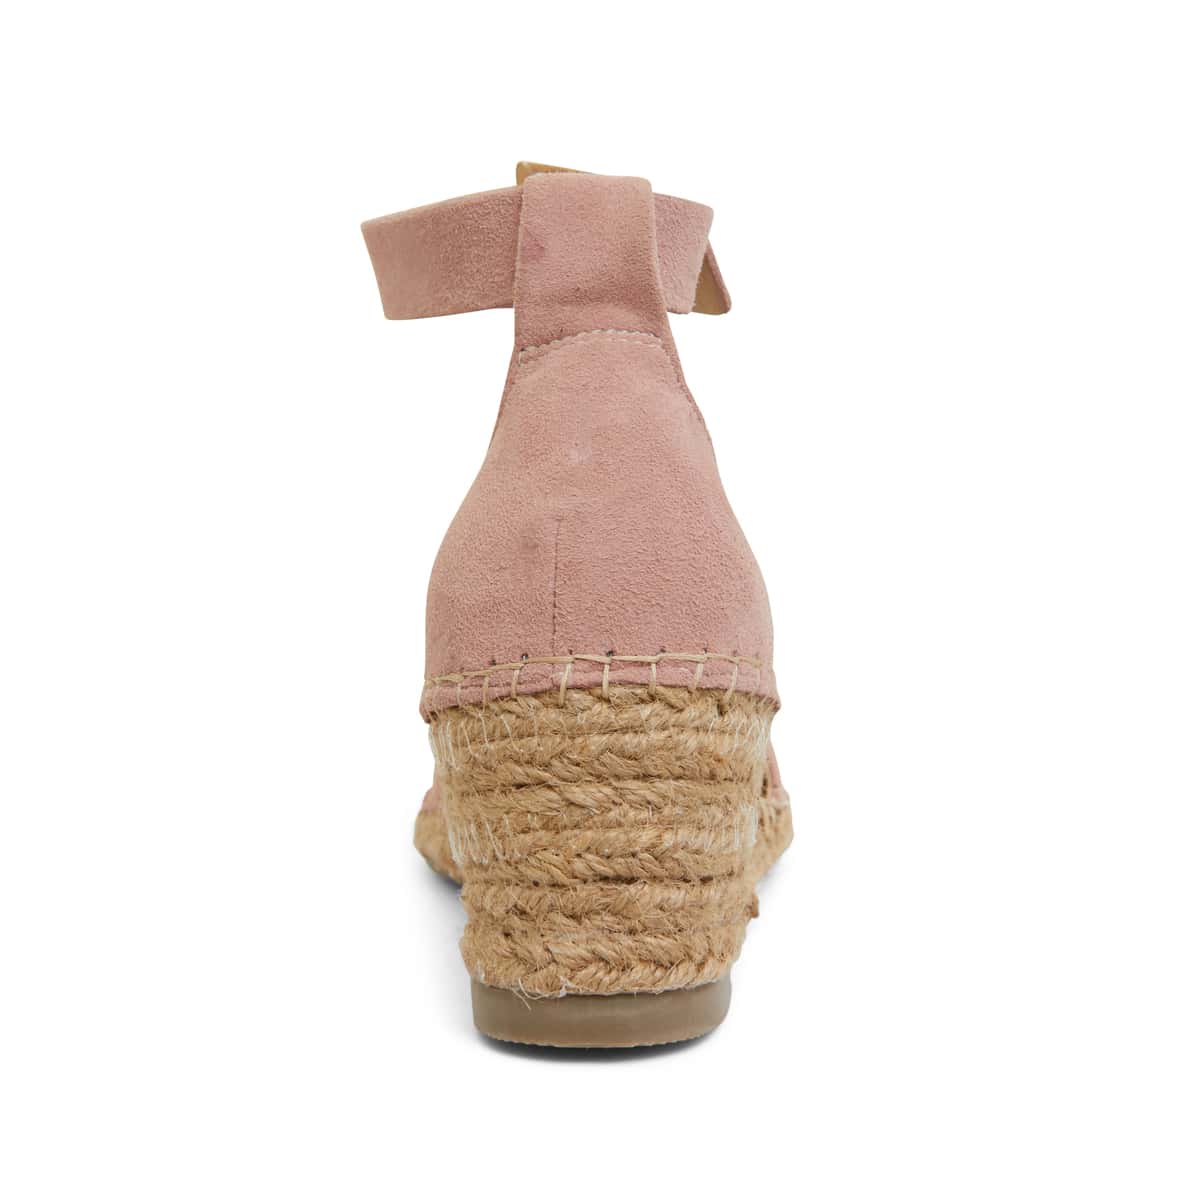 Henley Espadrille in Blush Leather